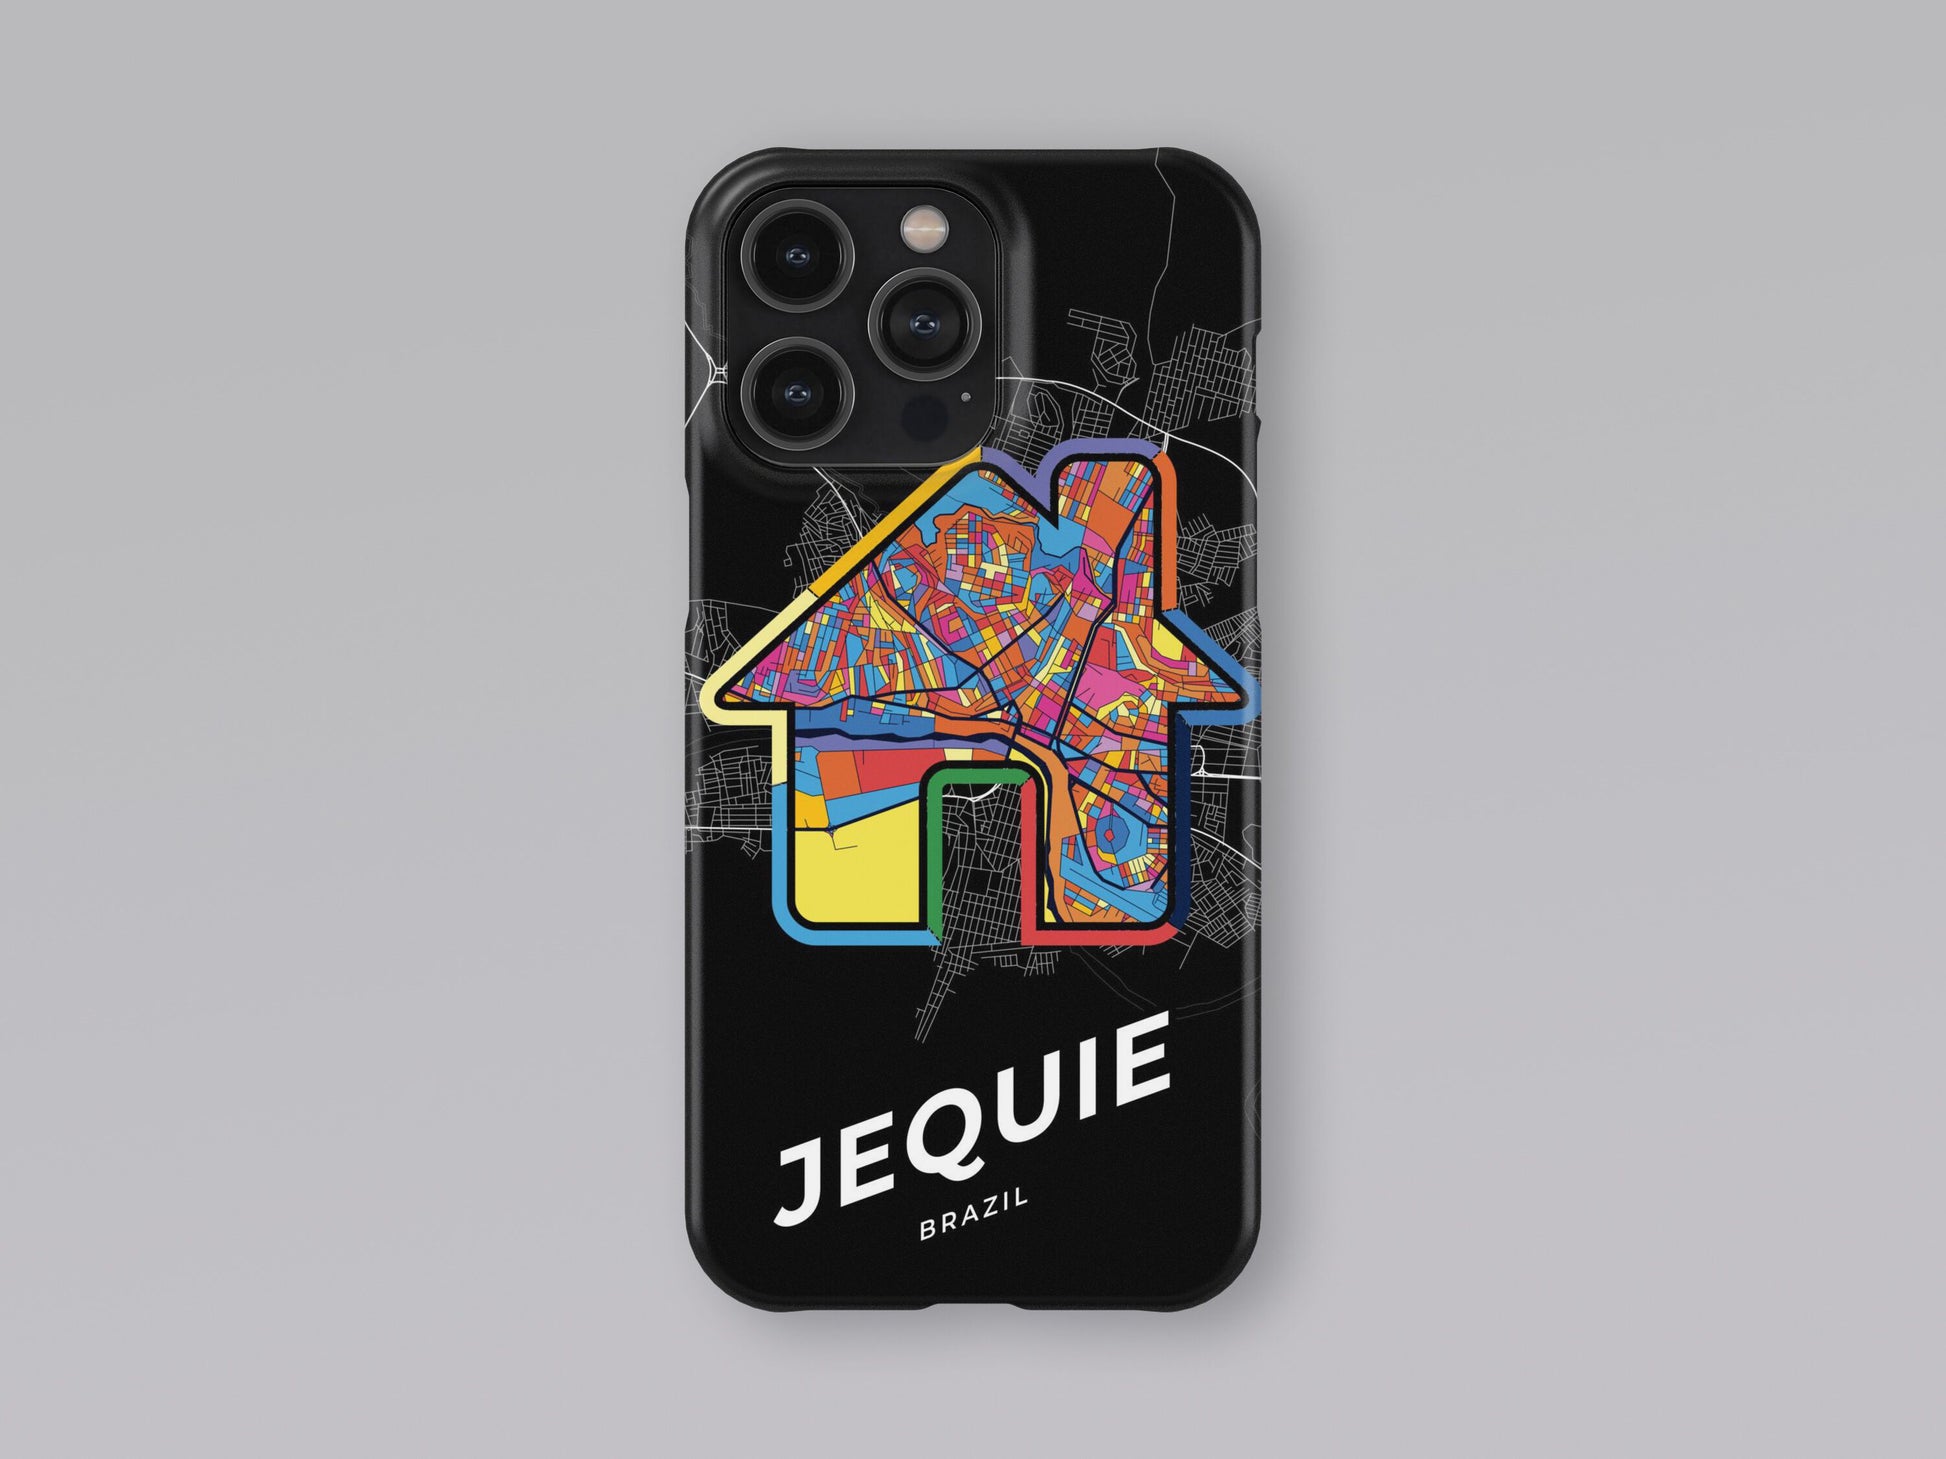 Jequie Brazil slim phone case with colorful icon. Birthday, wedding or housewarming gift. Couple match cases. 3